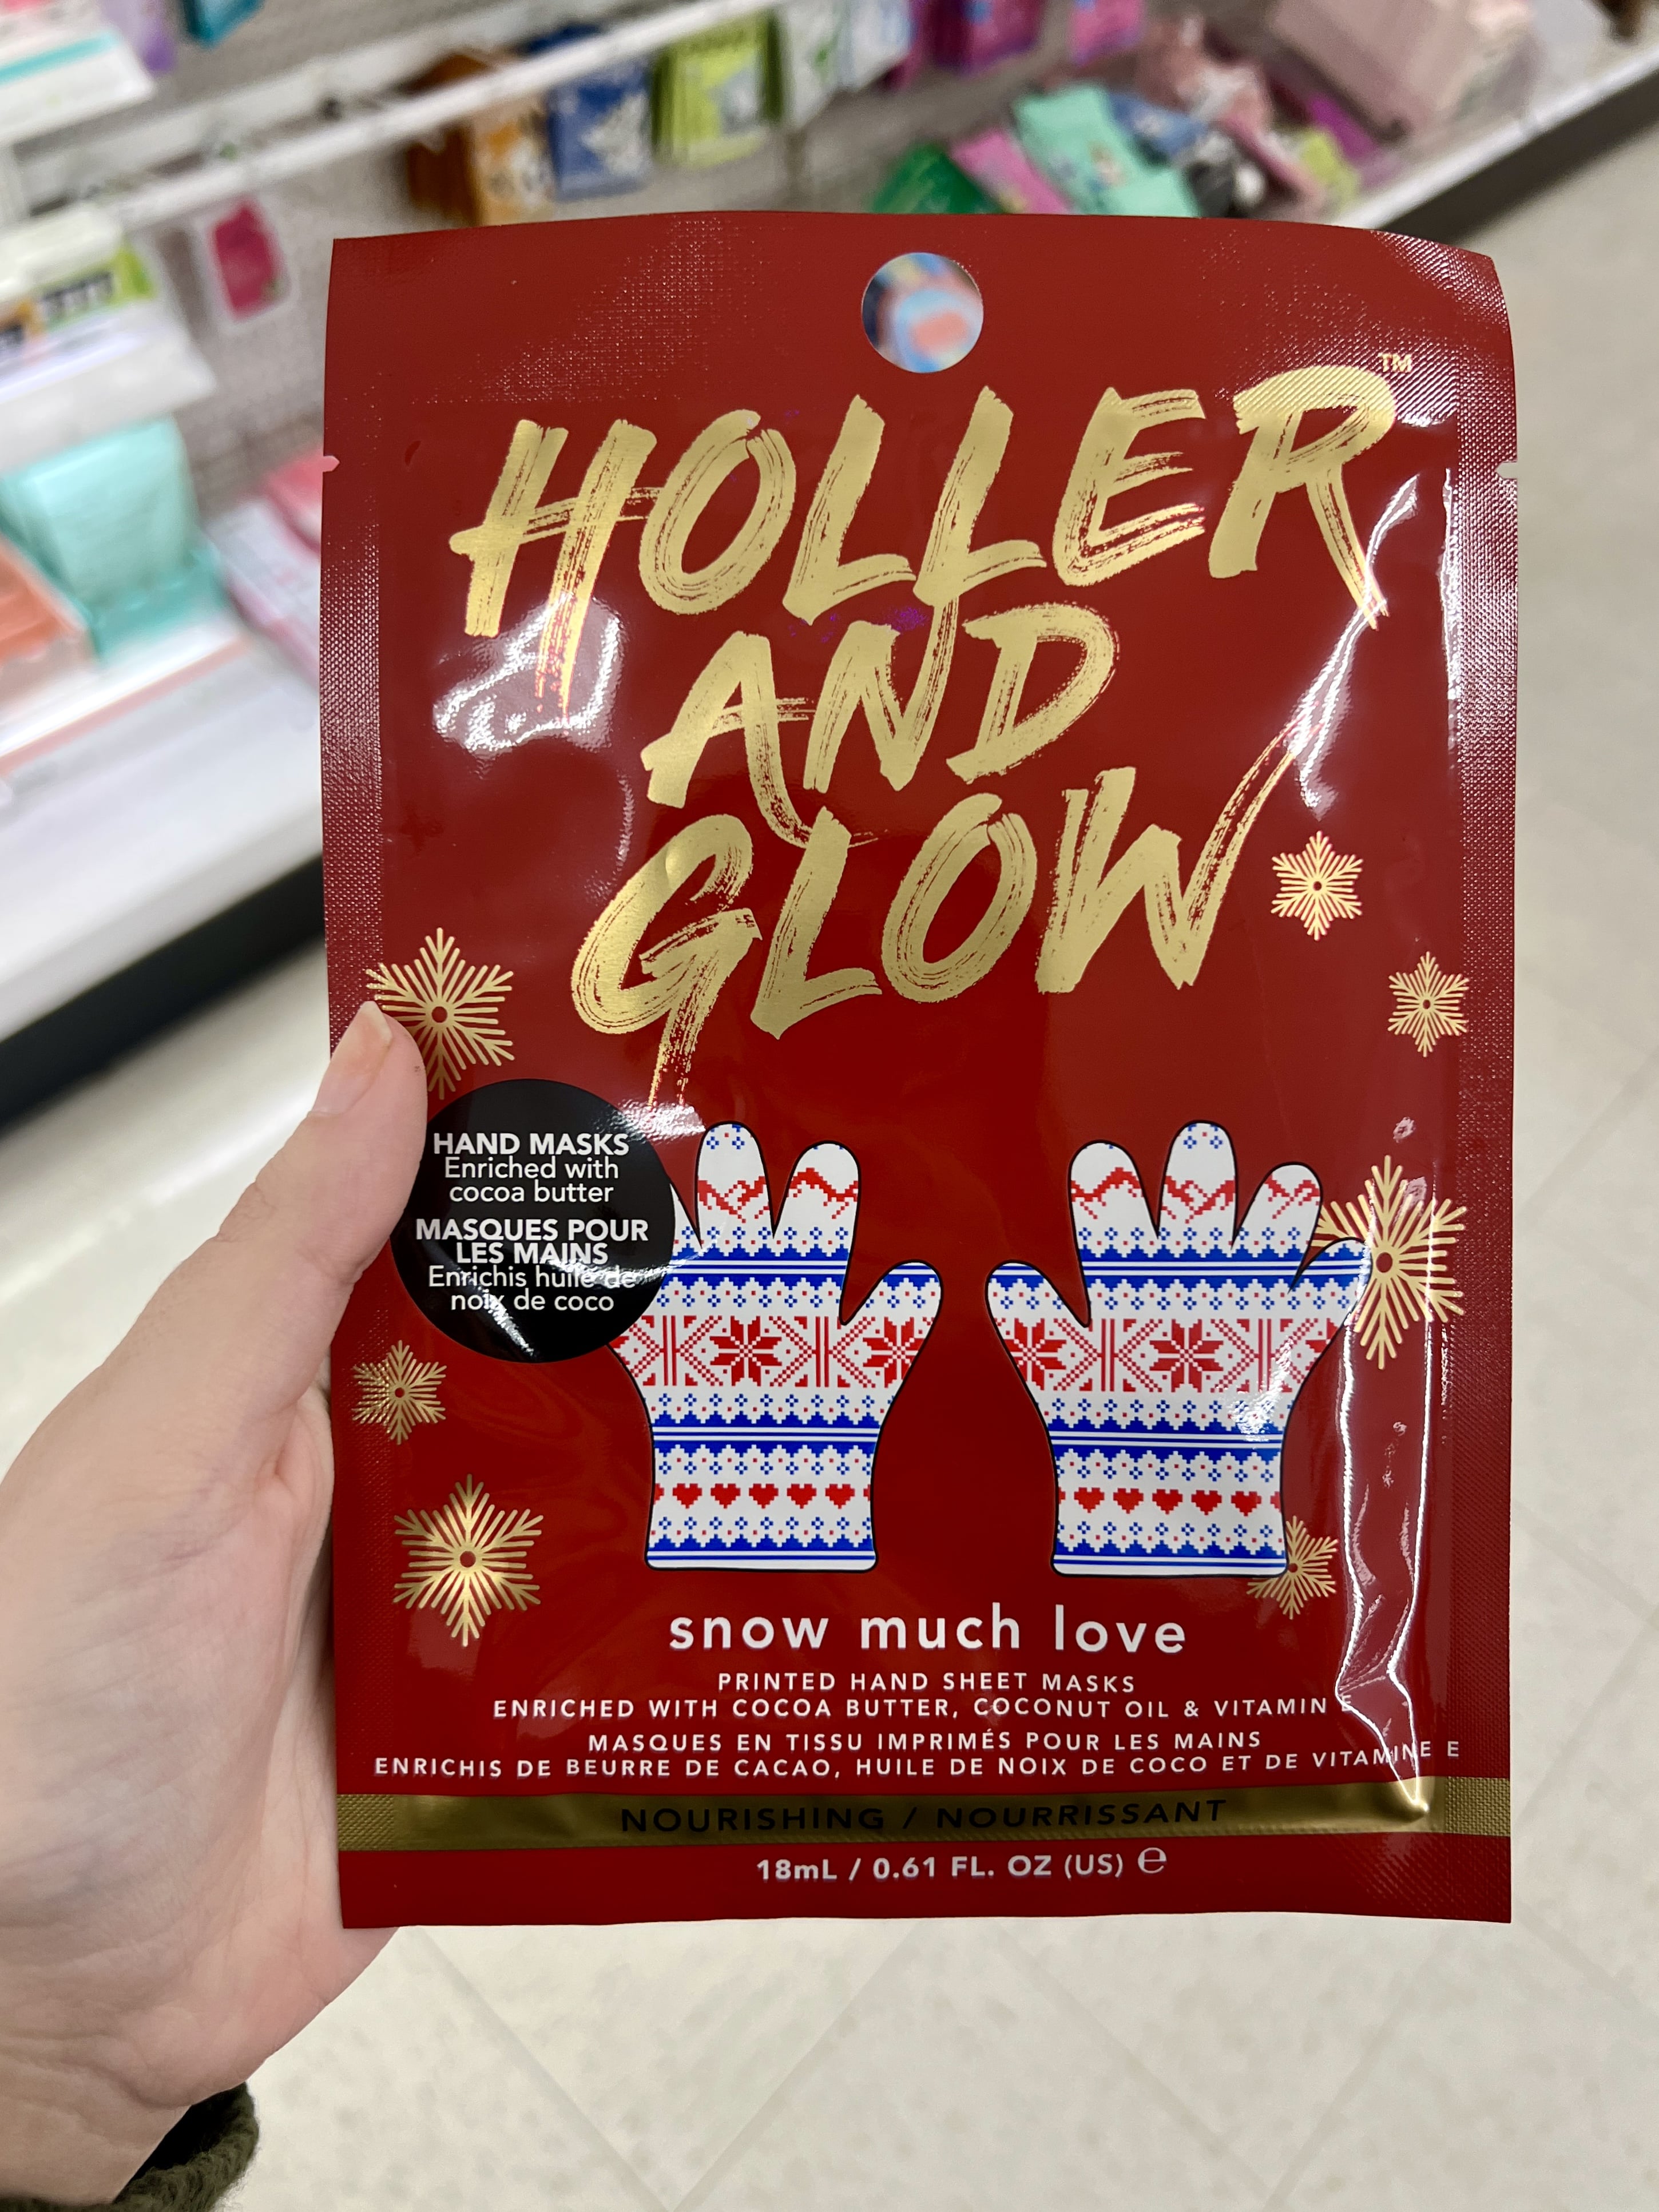 Target Is Selling a $10 Hot Cocoa Bar Set for the Holidays